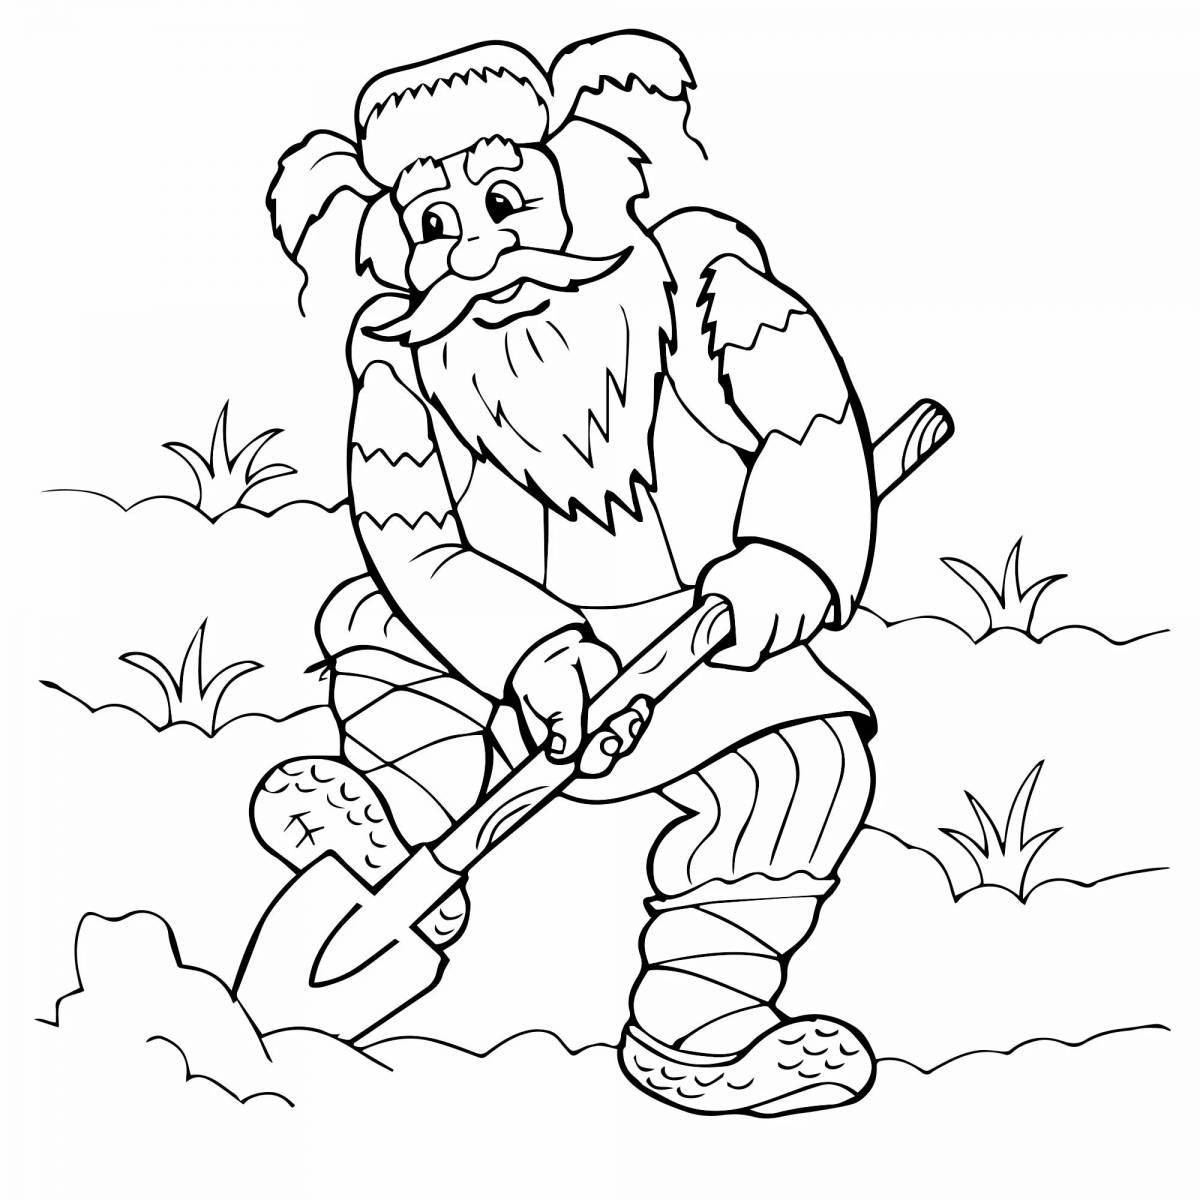 Adorable grandfather coloring page for kids